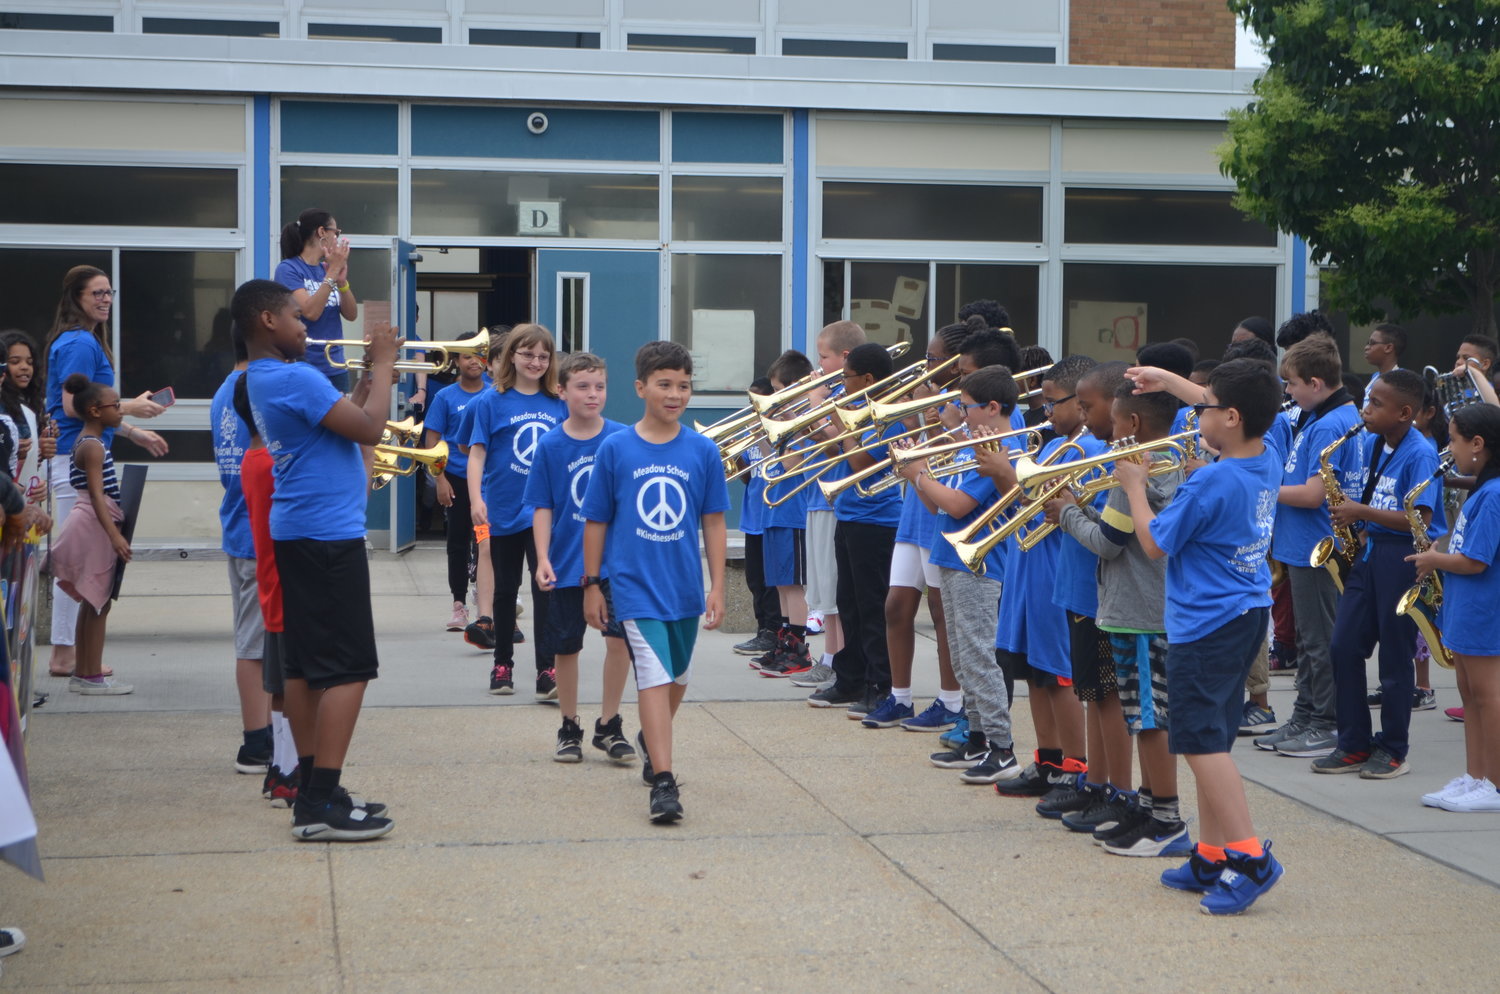 And they’re off to a global contest — The Baldwin School District hosted a send-off celebration June 5 before a group of Meadow Elementary School students embarked on a trip to the international competition of the Future Problem Solving Bowl in Massachusetts. The team took second place.